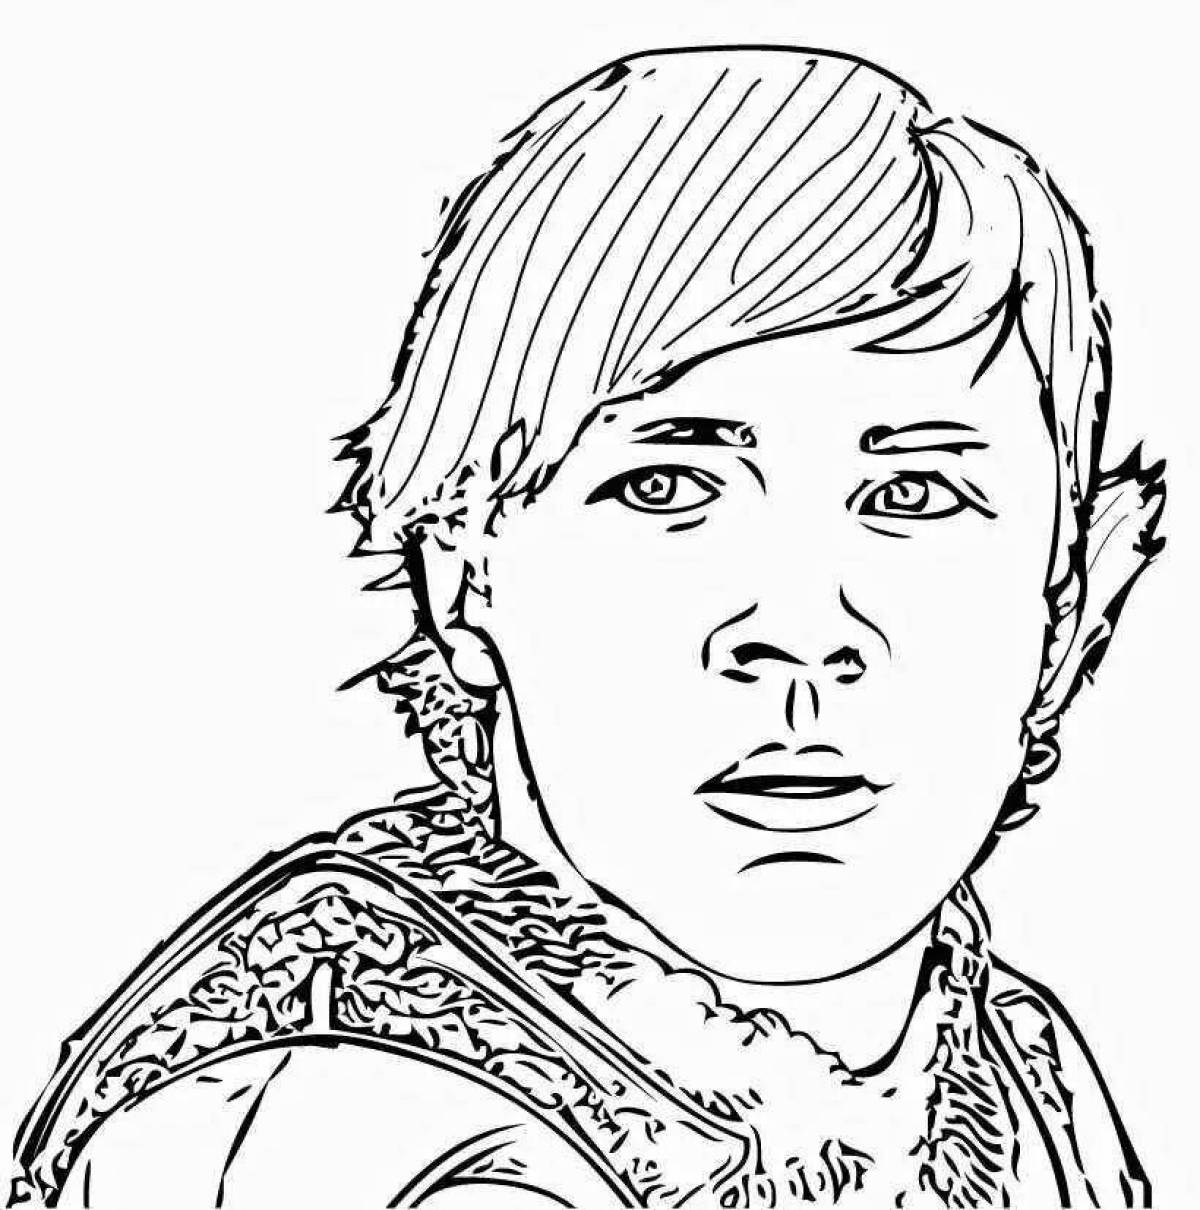 Chronicles of Narnia coloring book